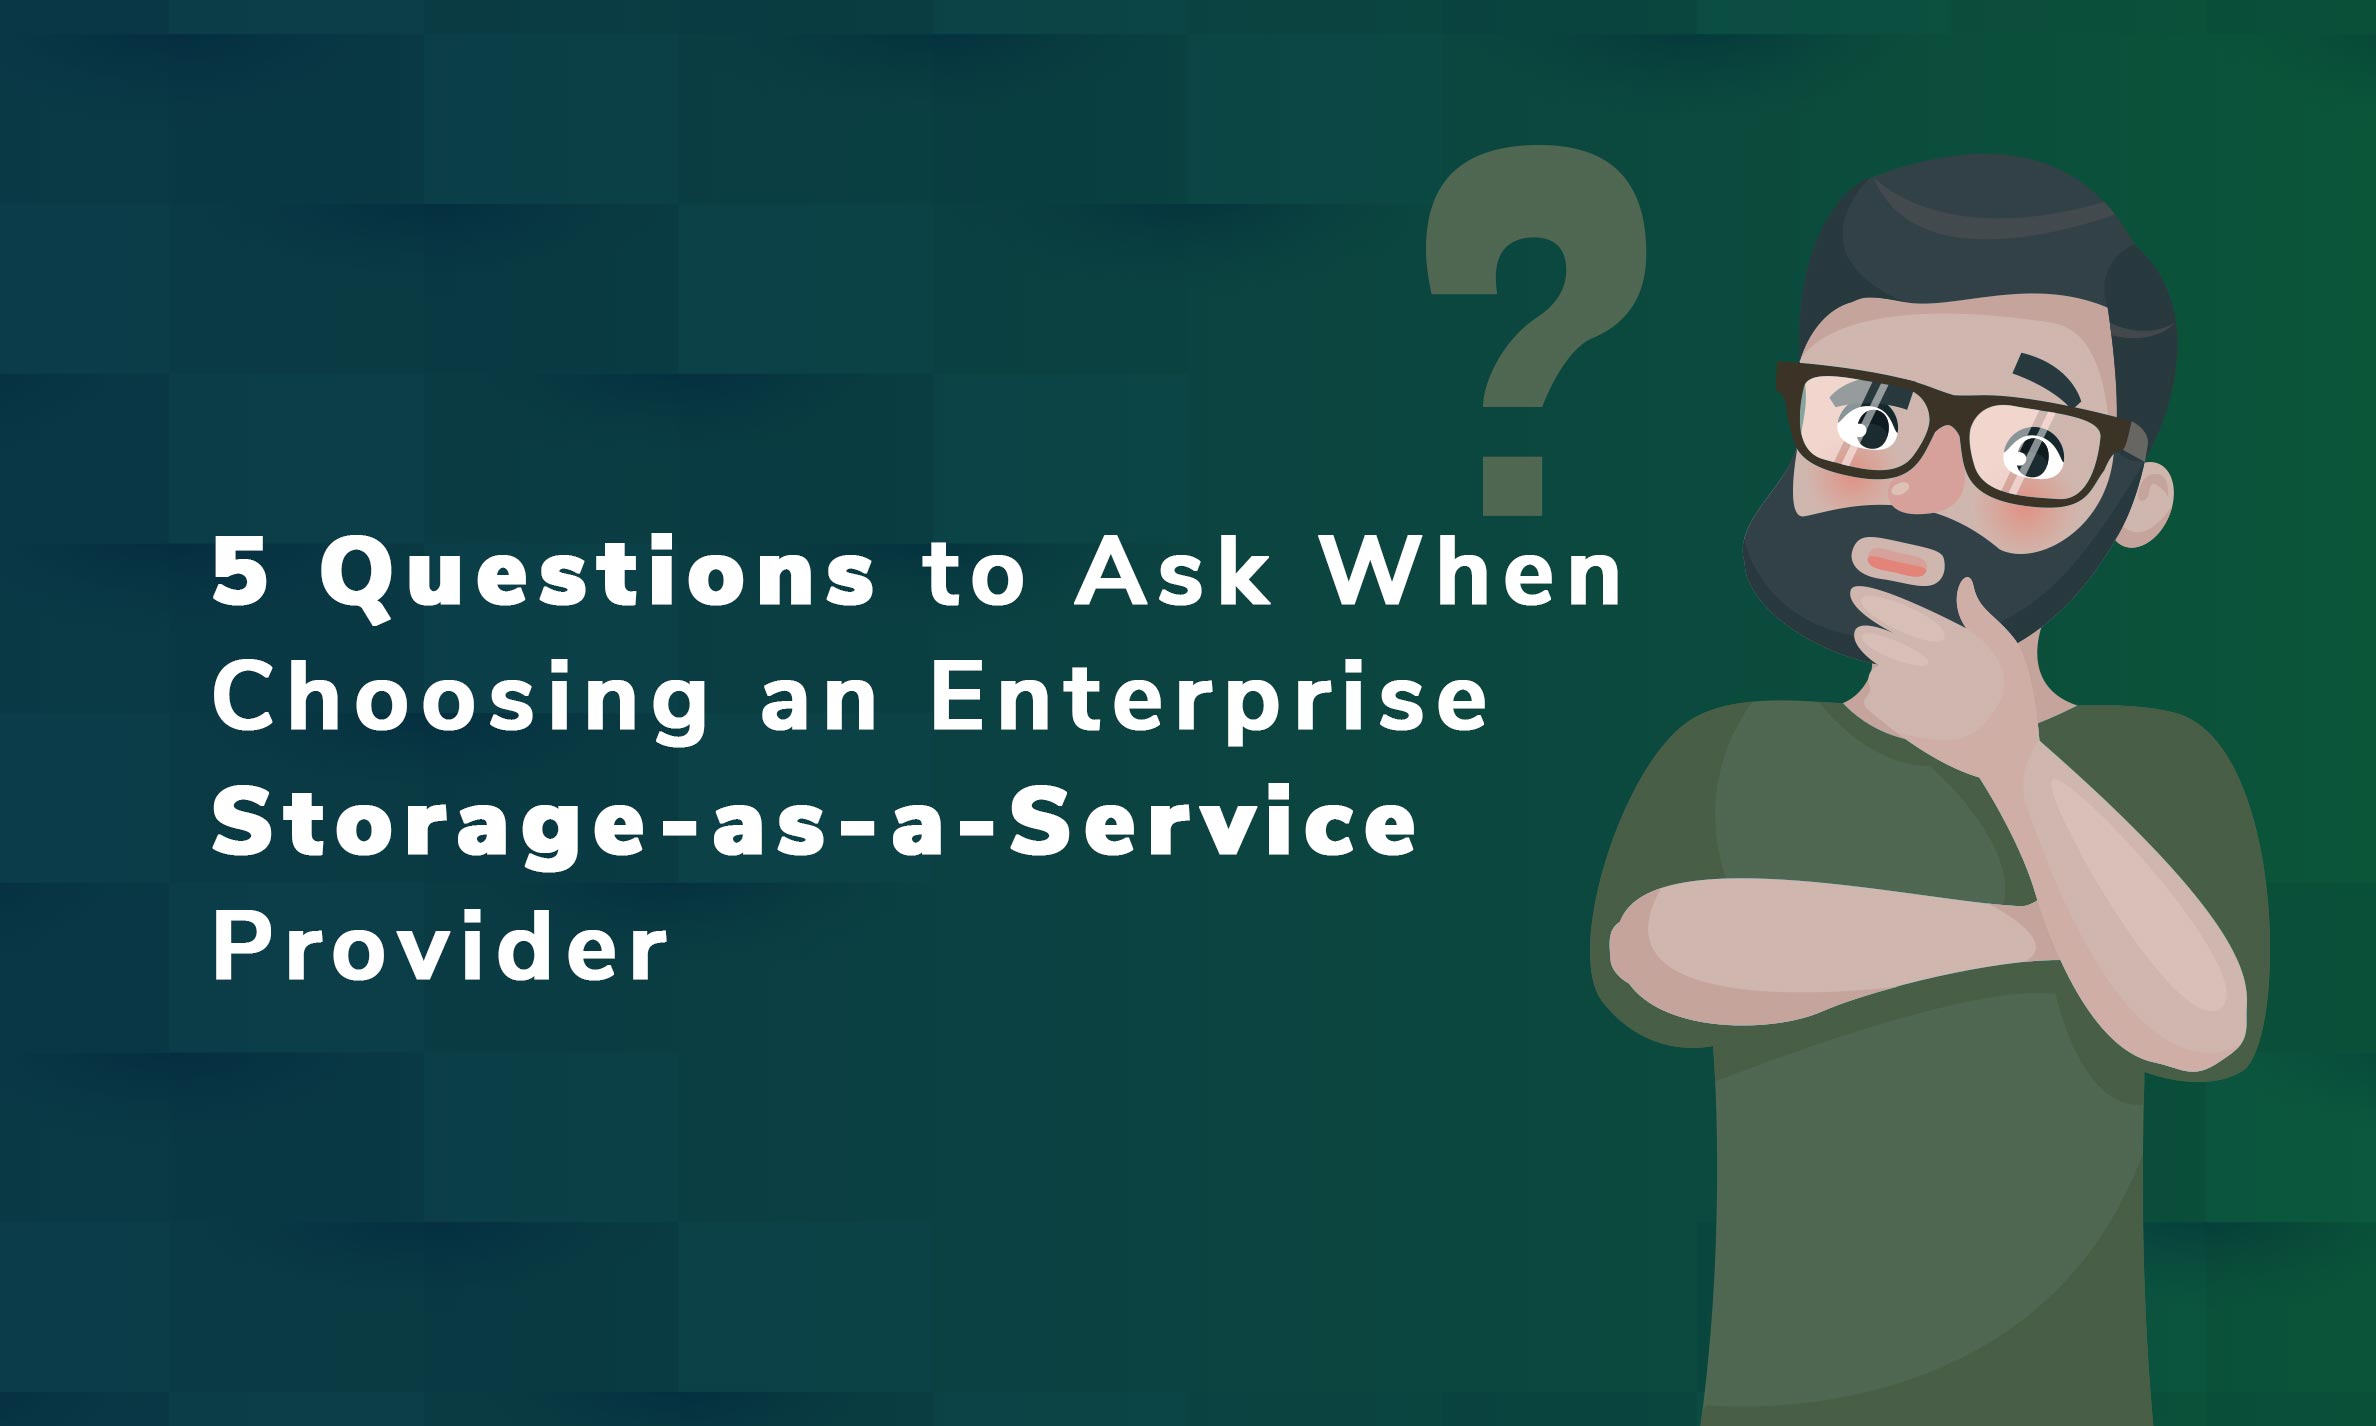 Five Questions to Ask When Choosing an Enterprise Storage-as-a-Service Provider